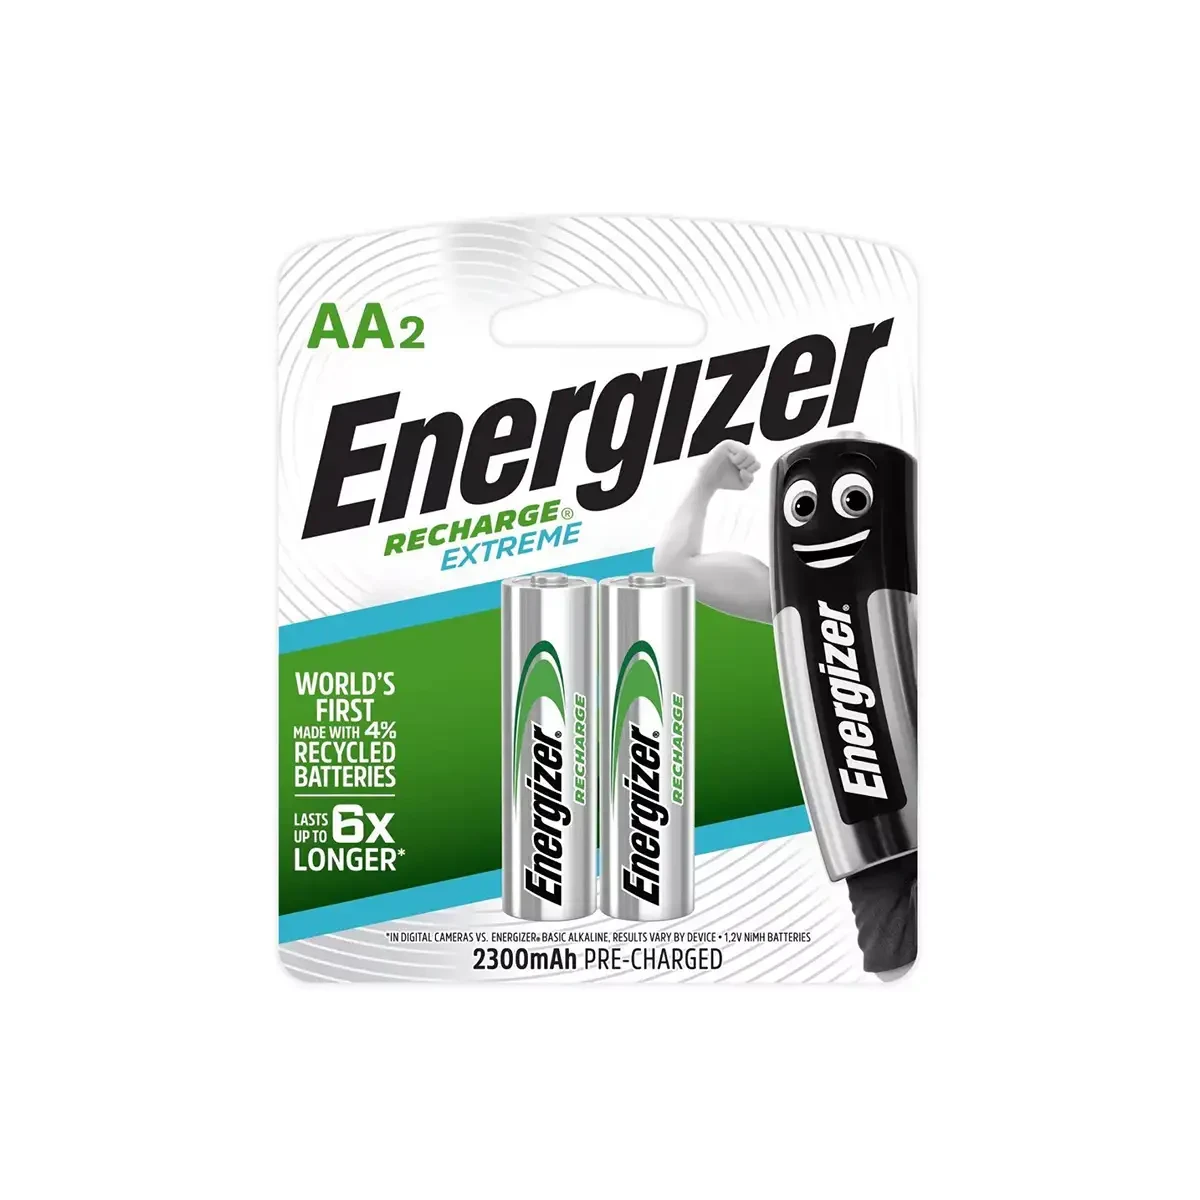 Energizer 2 AA Rechargeable Blister Card - 2 حجر شحن قلم